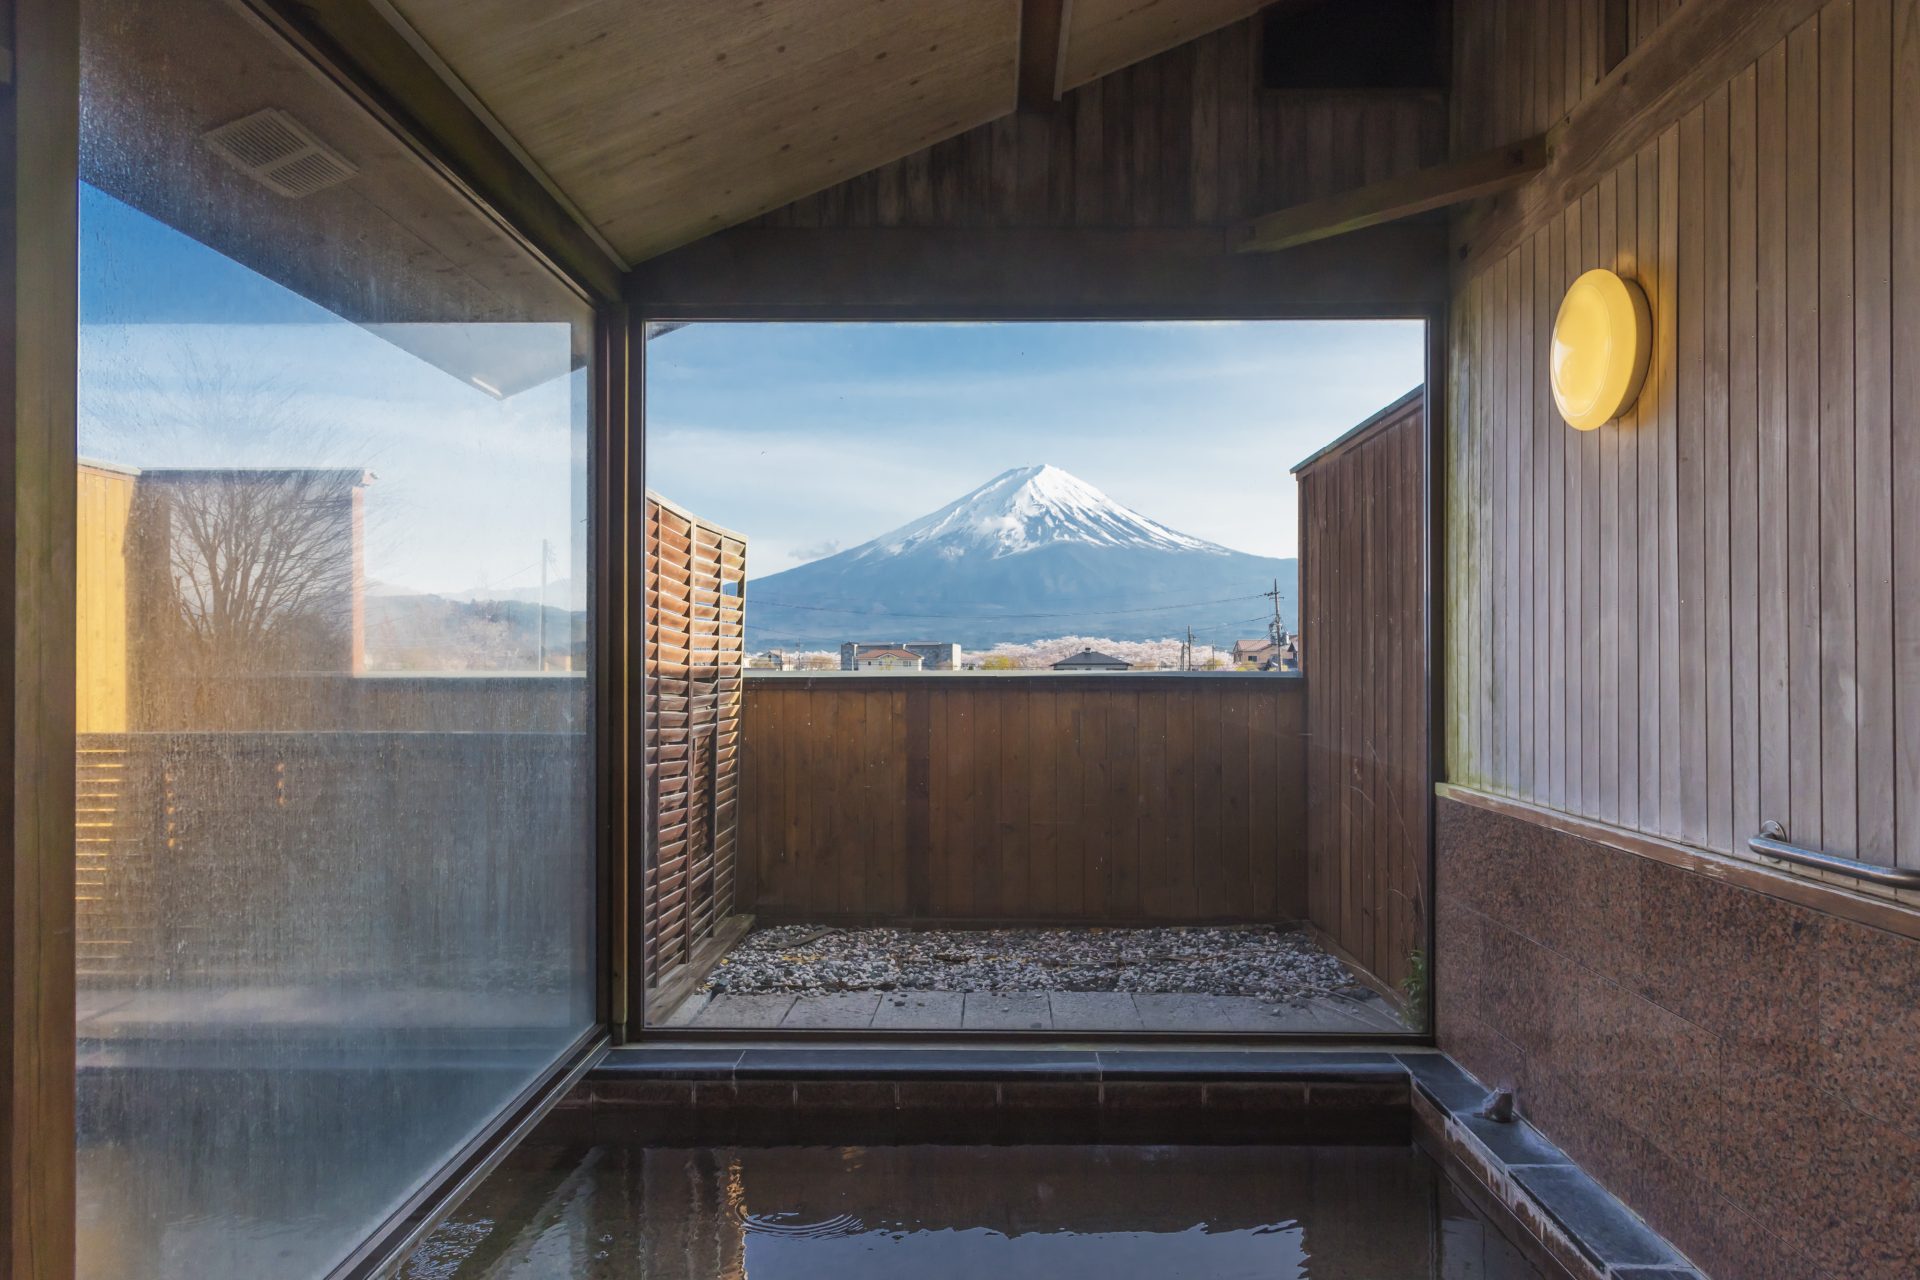 Hot springs with a view of Mt. Fuji / Japan